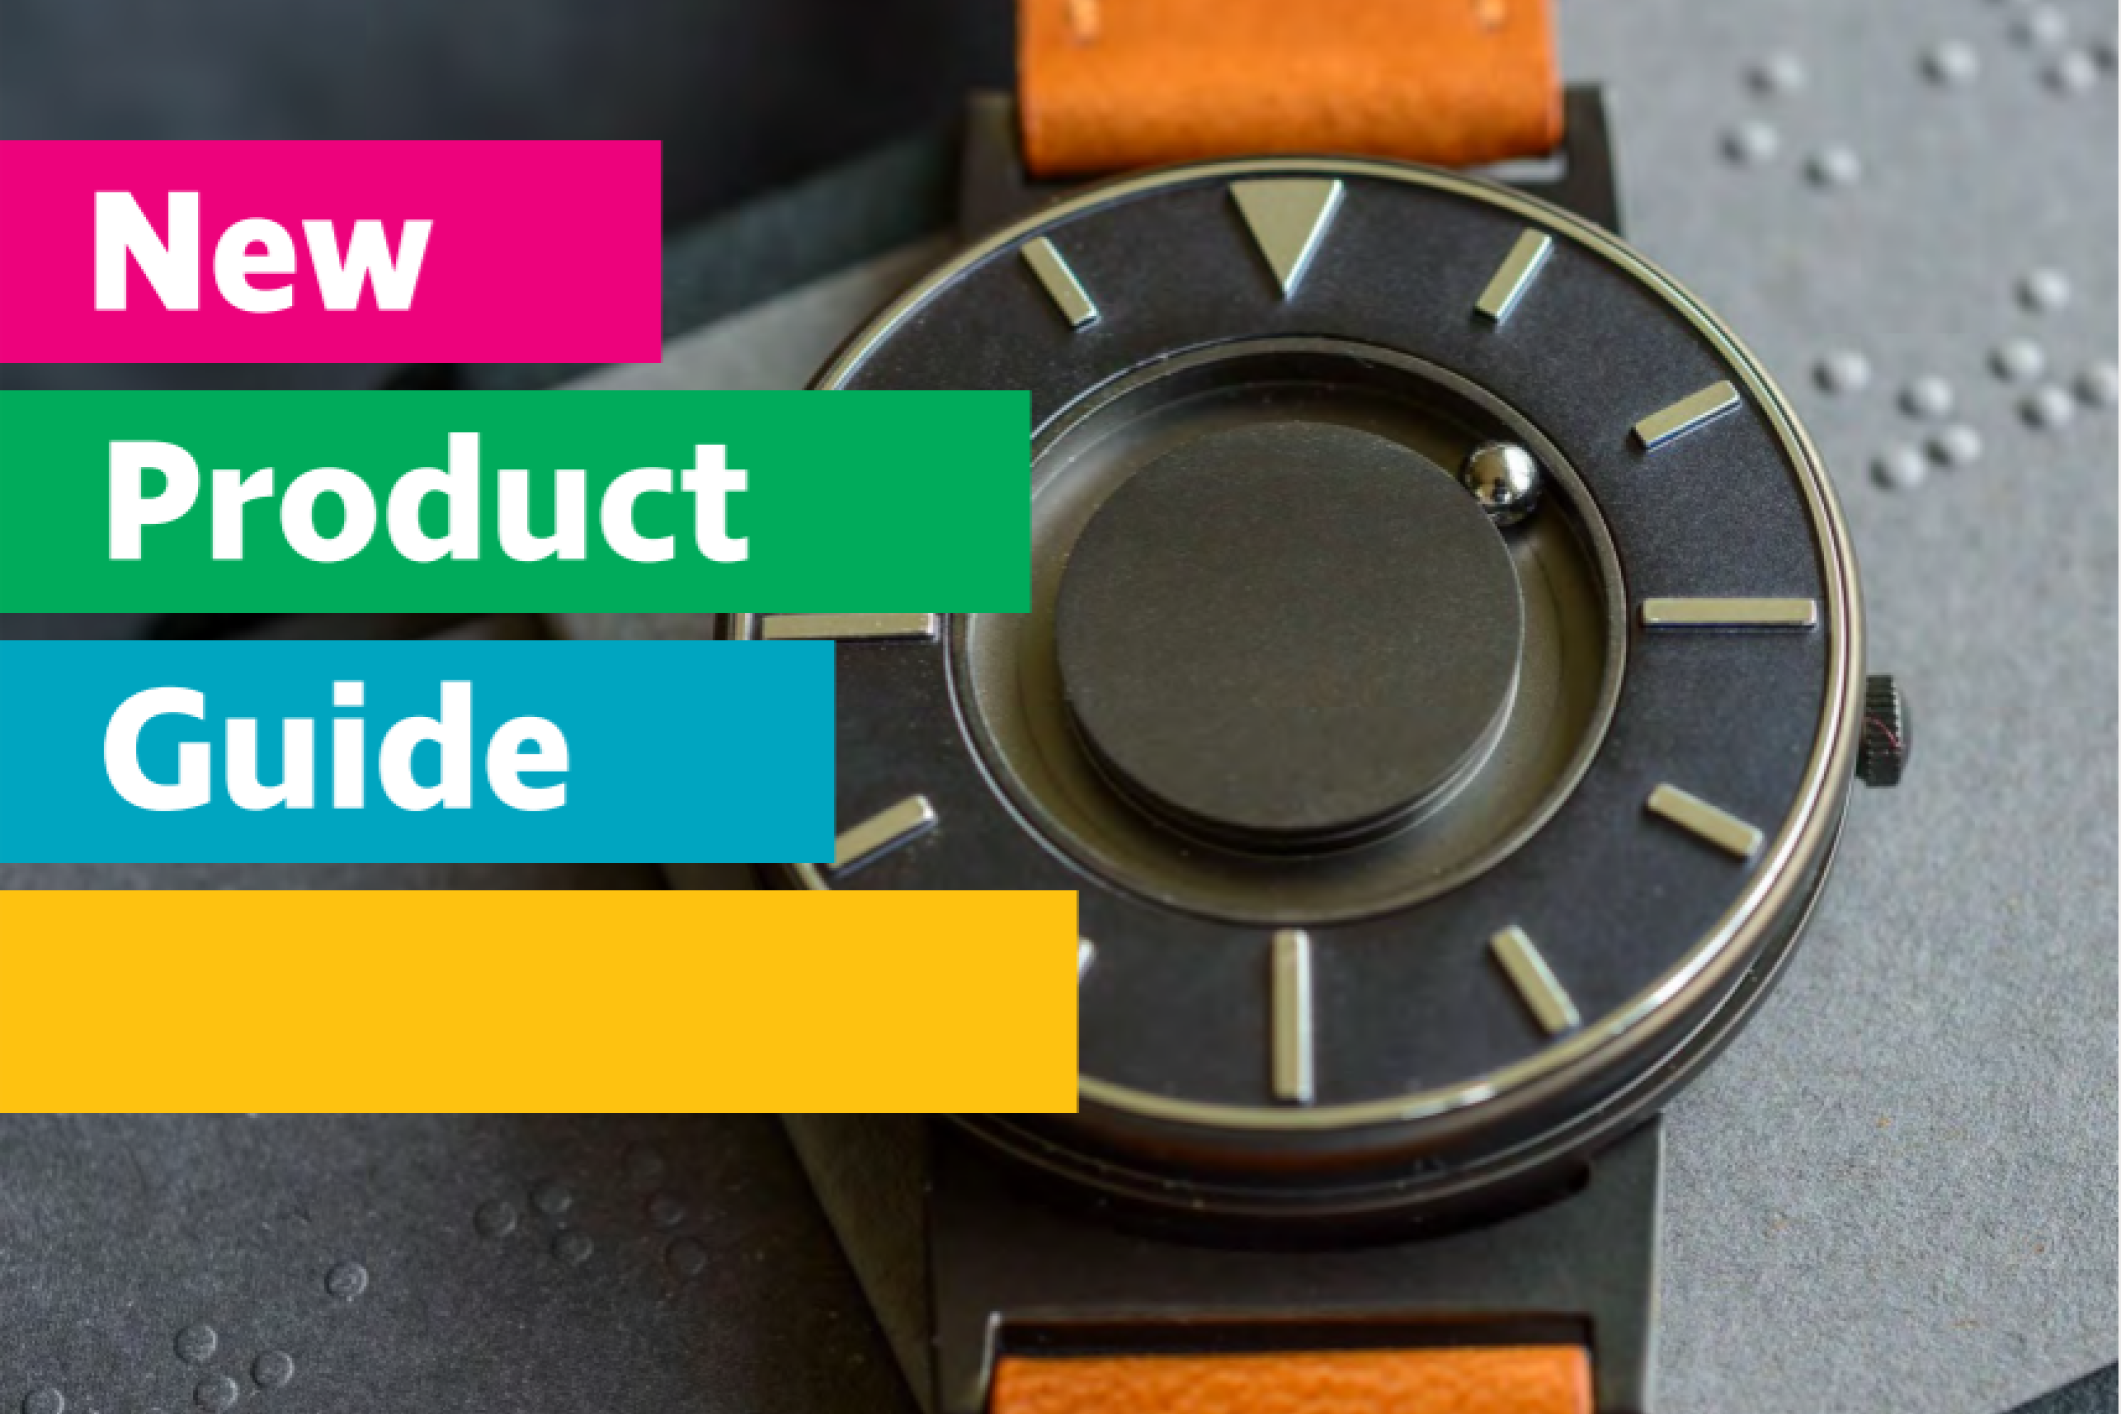 Brightly coloured New Product Guide working with a tactile watch in the background